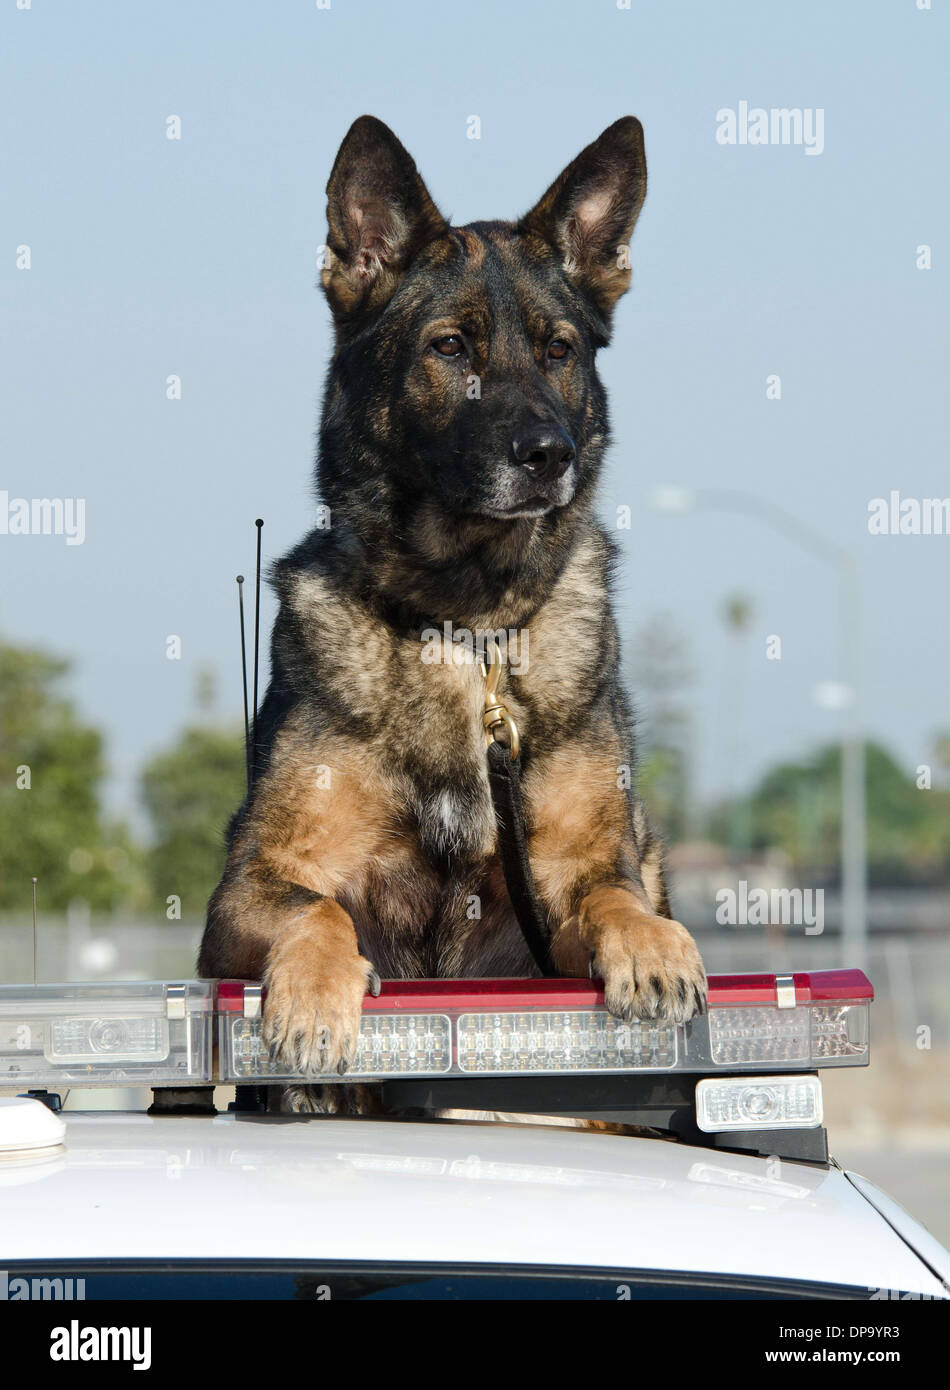 A K9 police dog sitting on top of the 